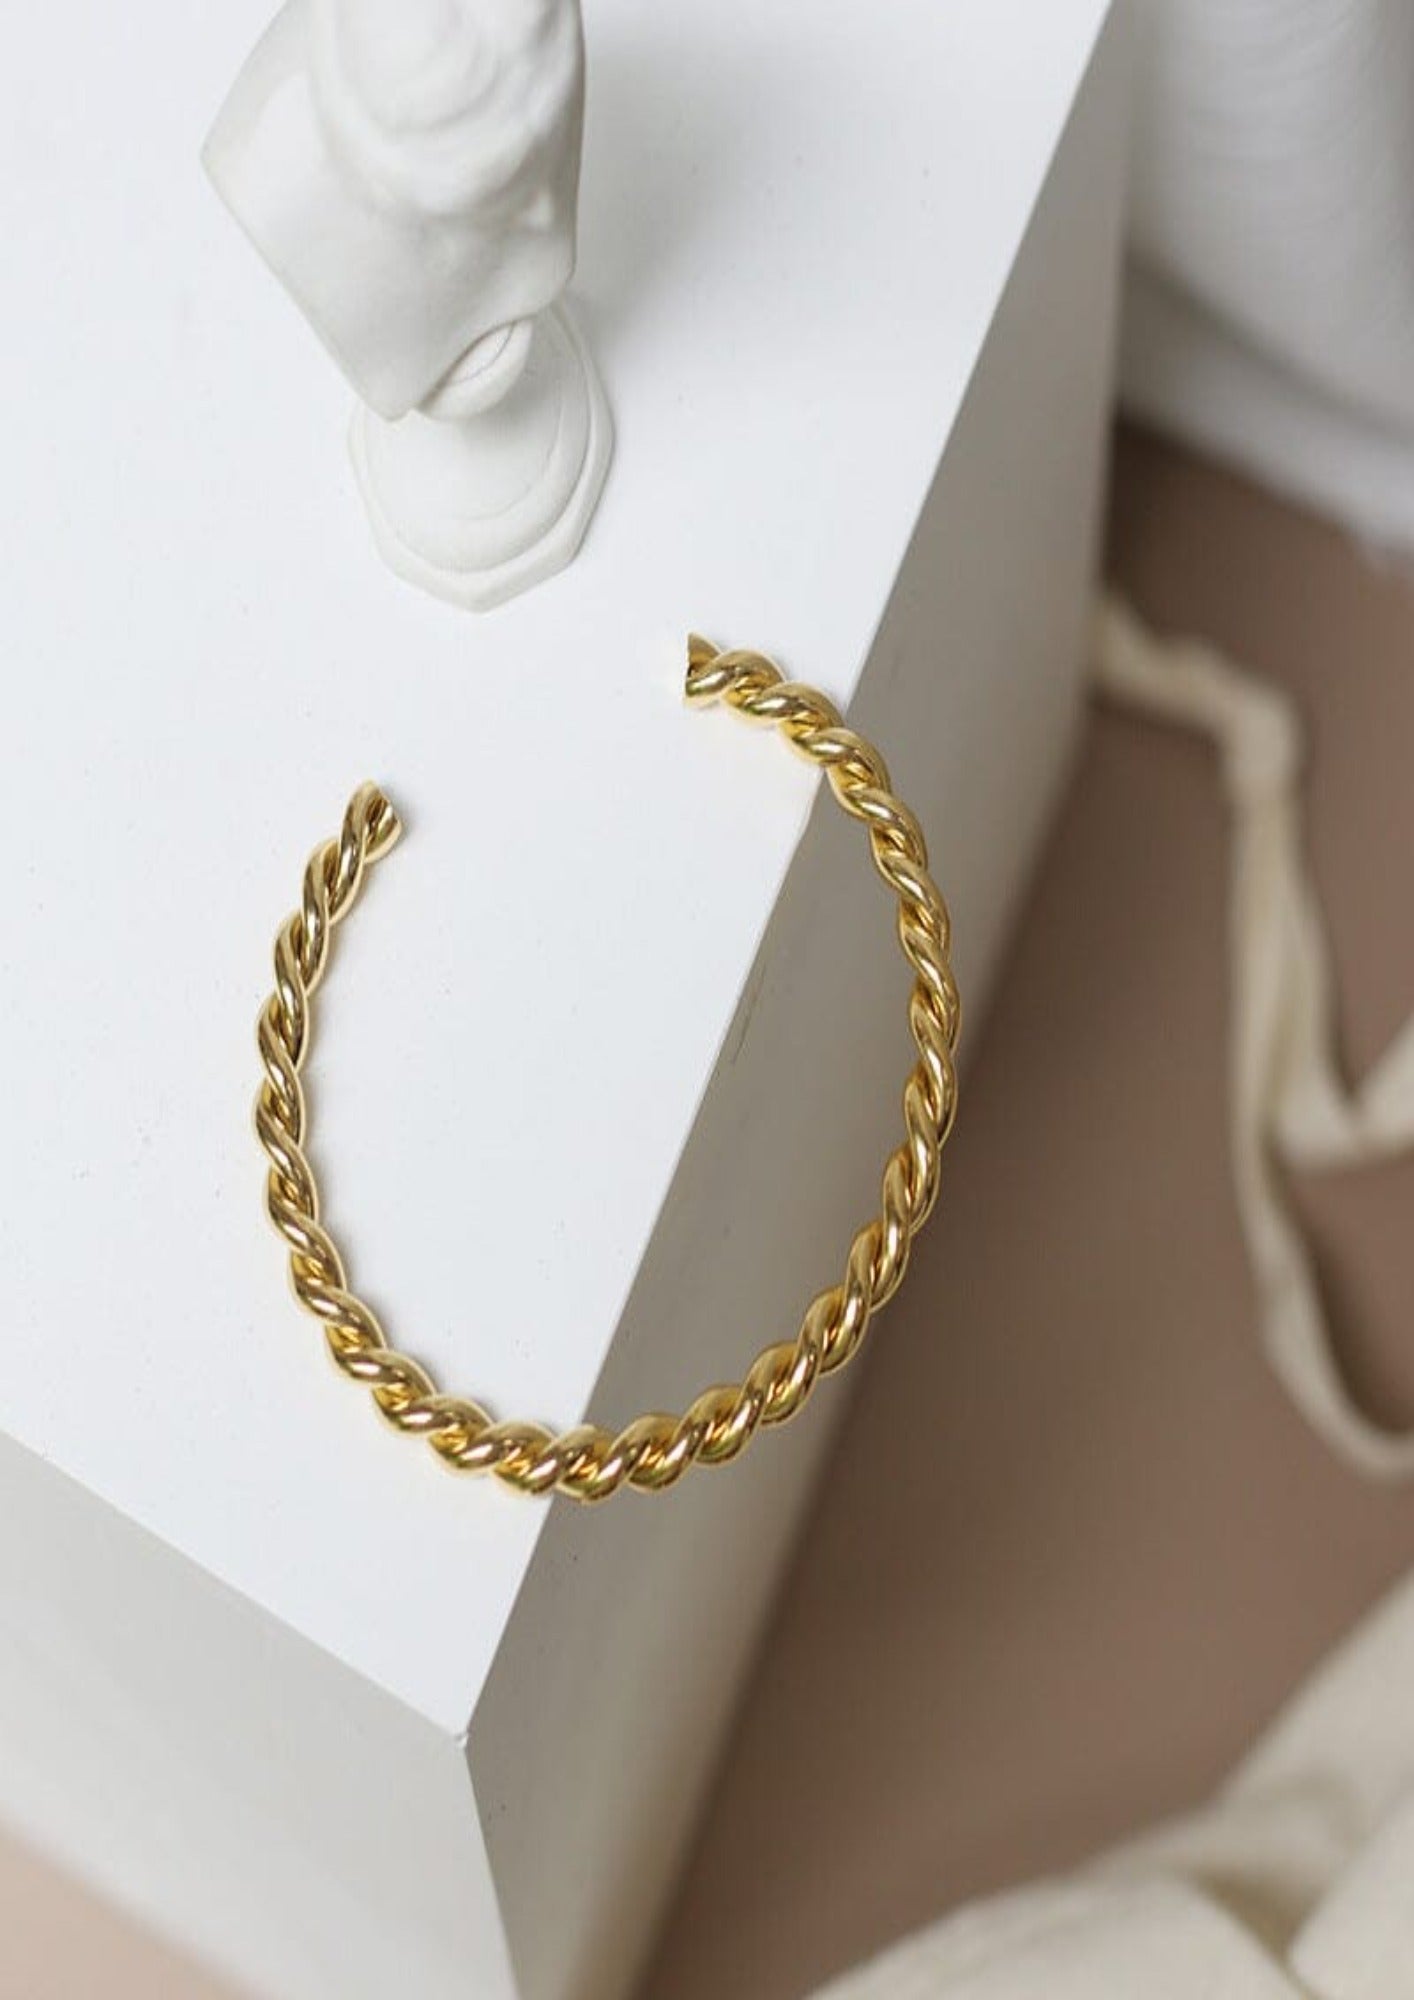 NIKO BRACELET braclet Yubama Jewelry Online Store - The Elegant Designs of Gold and Silver ! 